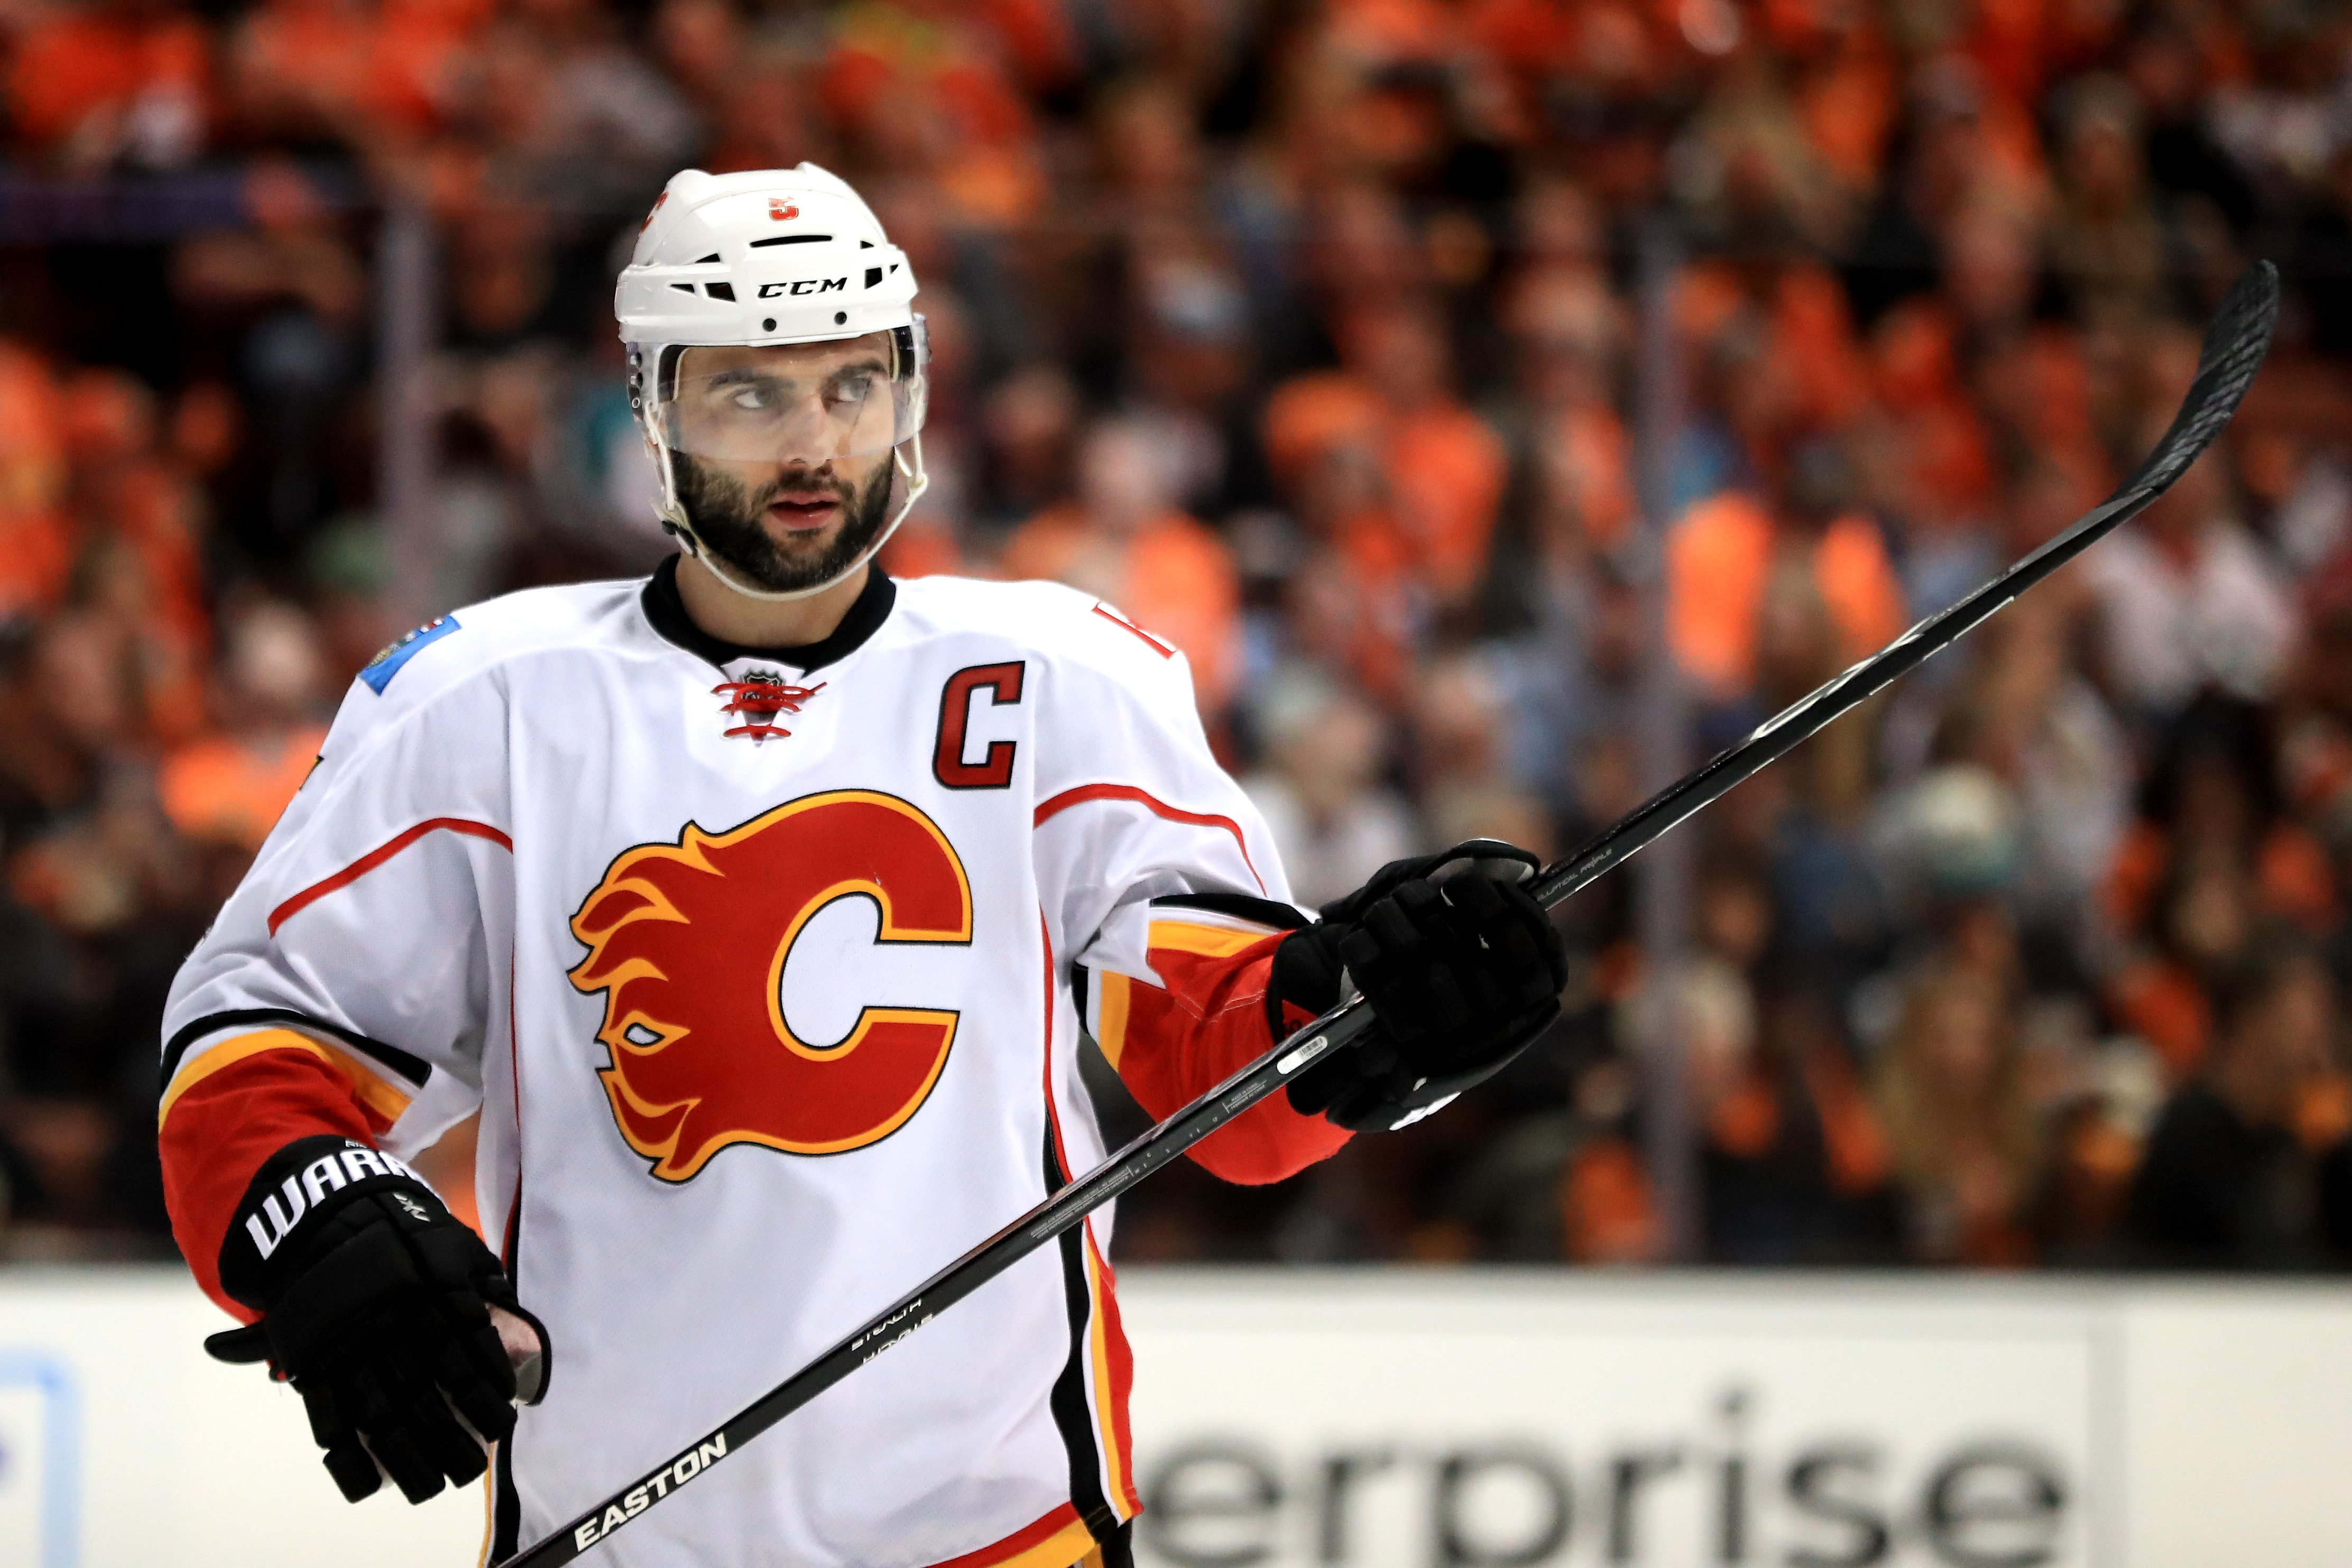 Mark Giordano's Calgary home is up for sale & here's a look inside